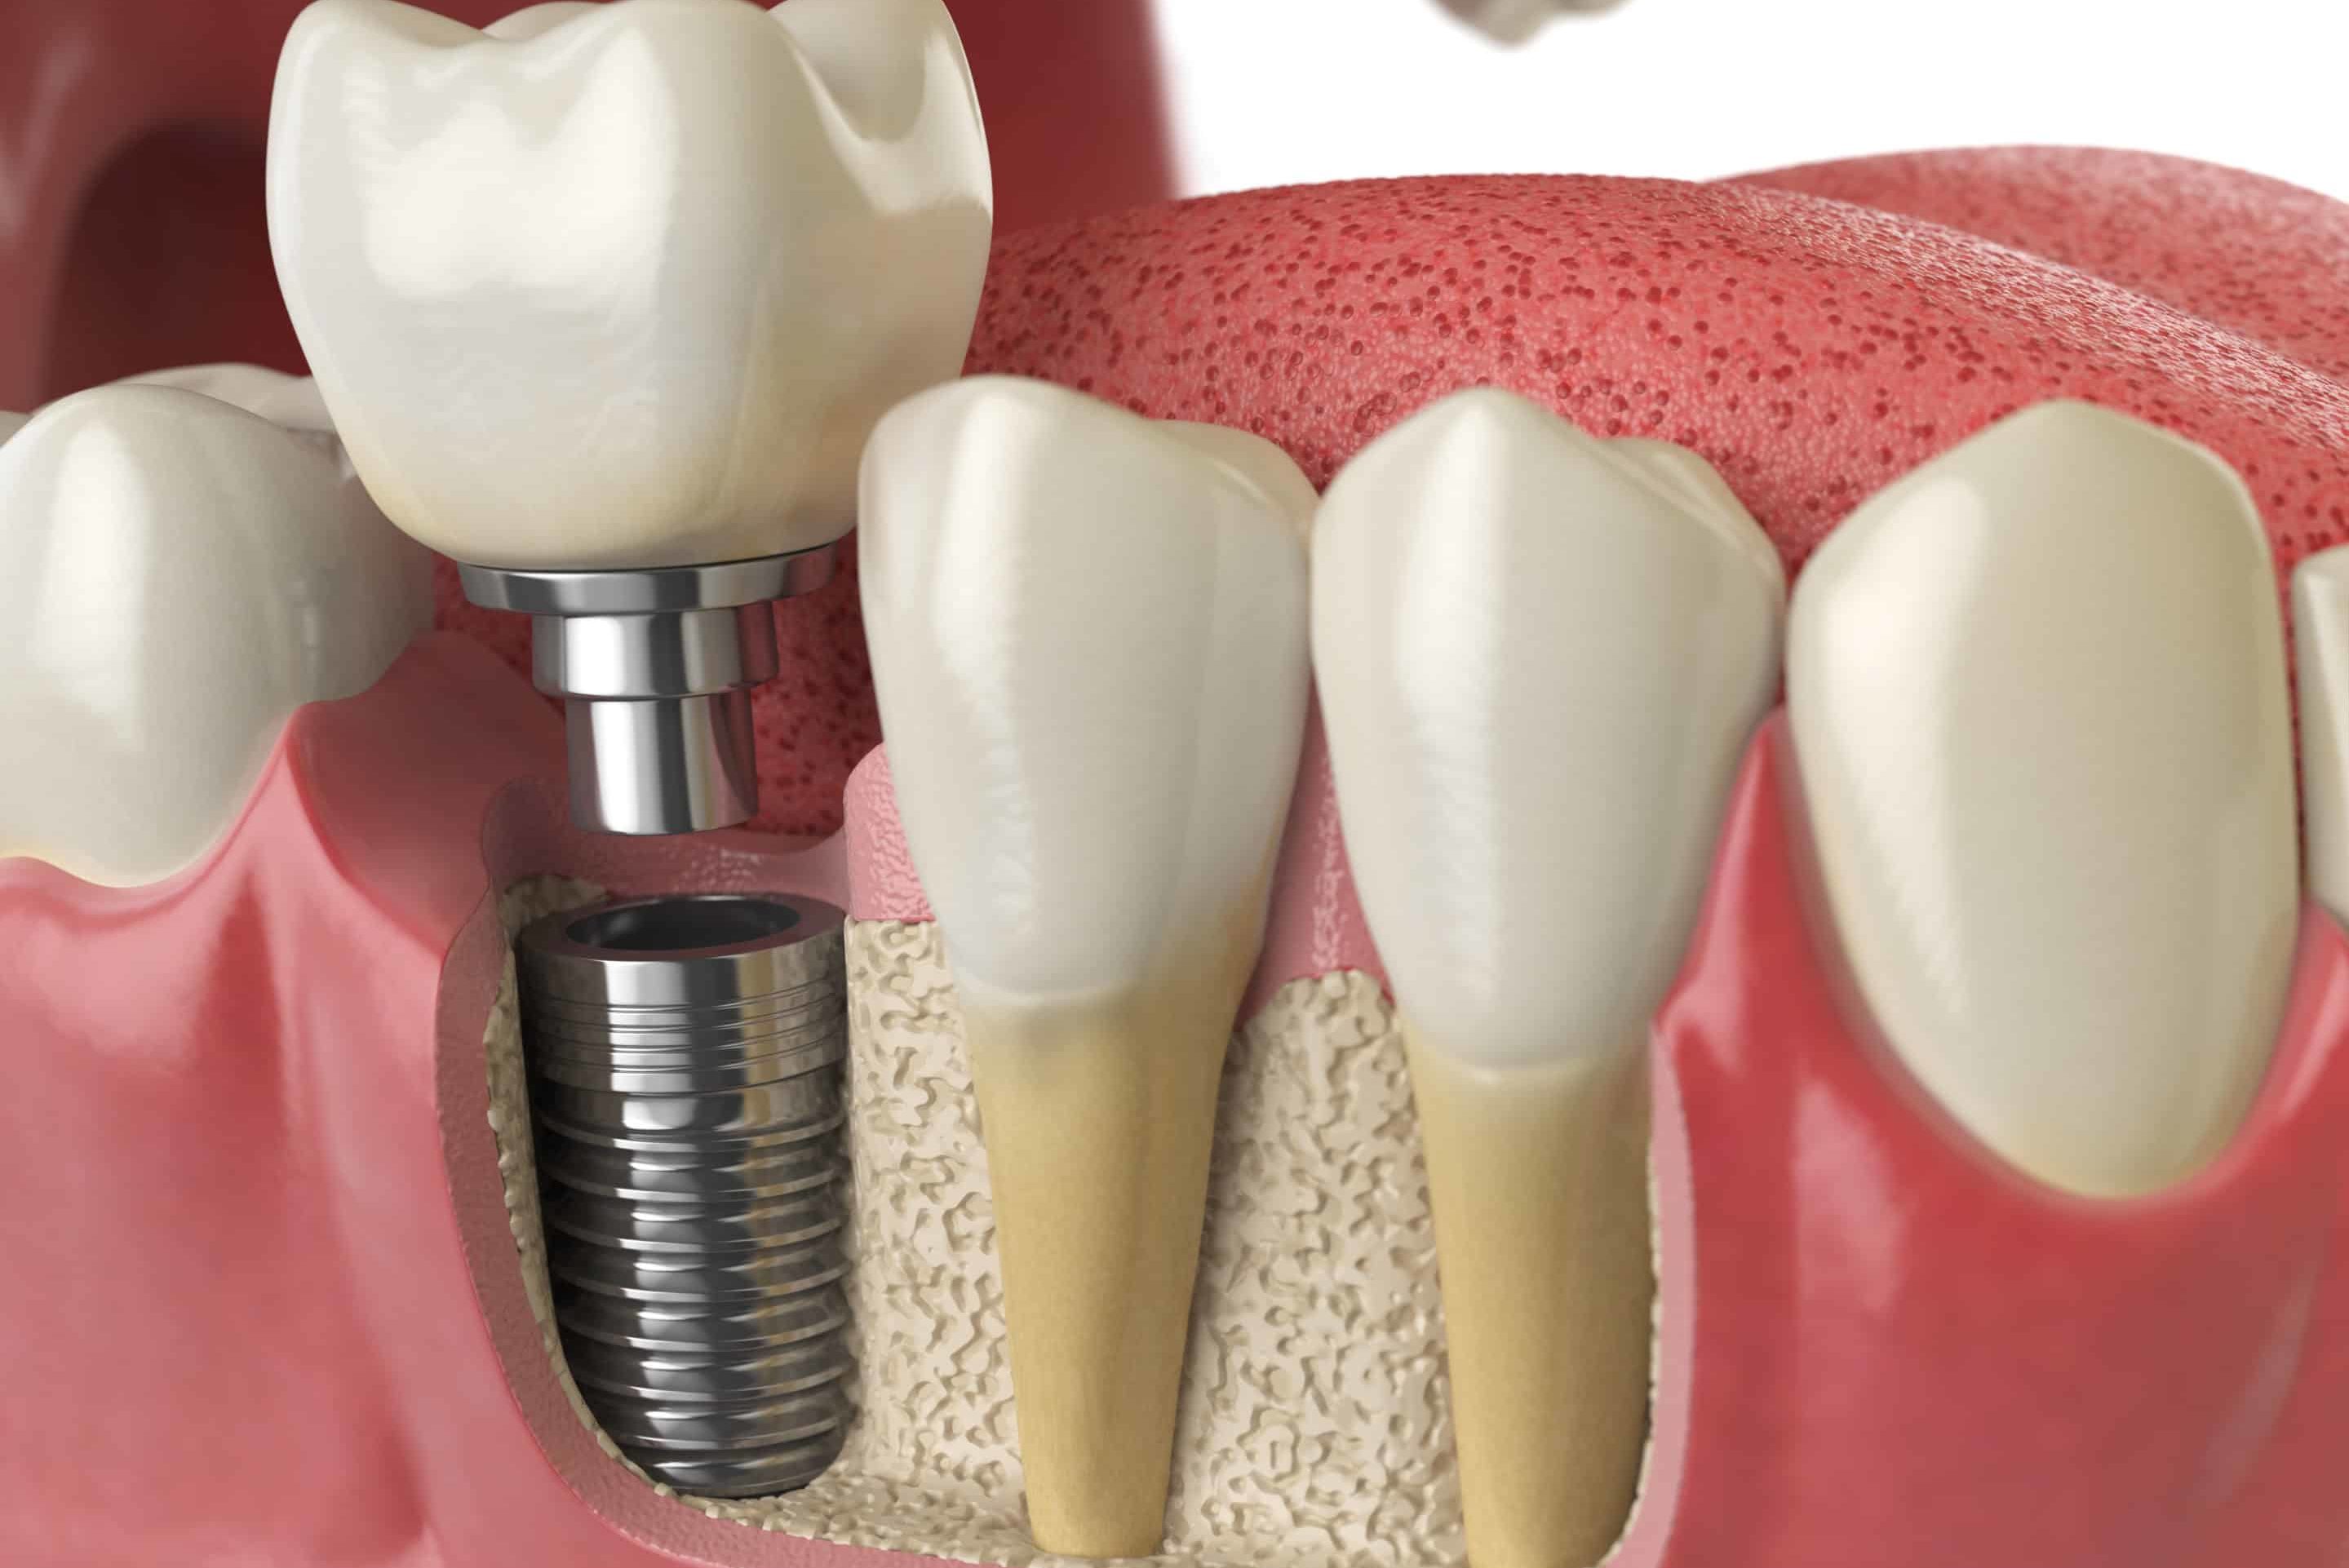 tooth dental implant